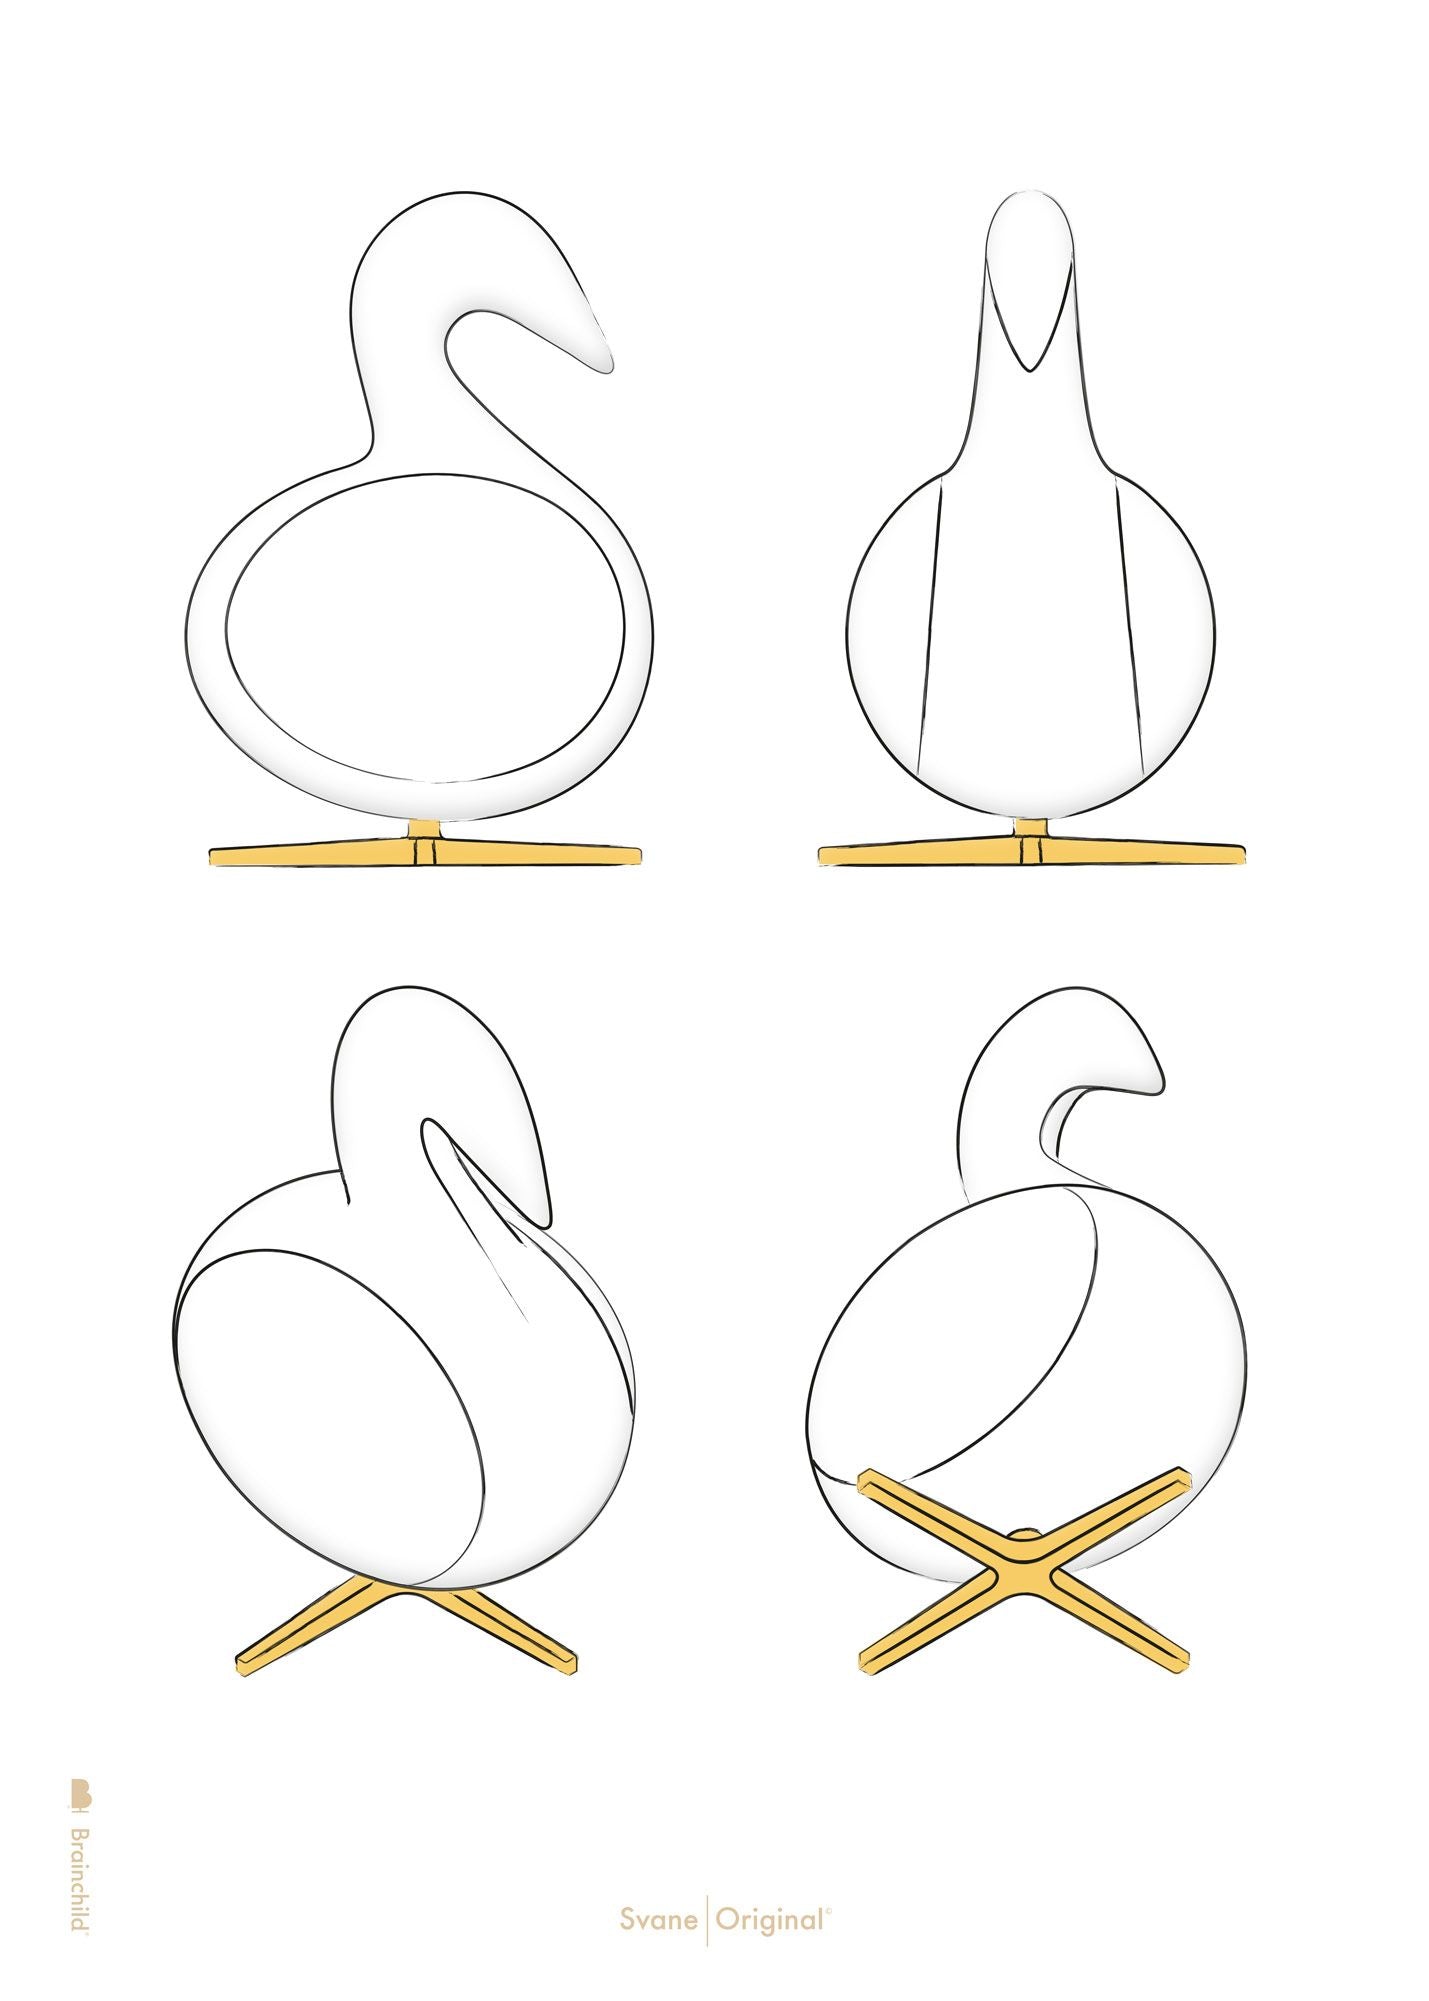 Brainchild Swan Design Sketches Poster Without Frame 50x70 Cm, White Background